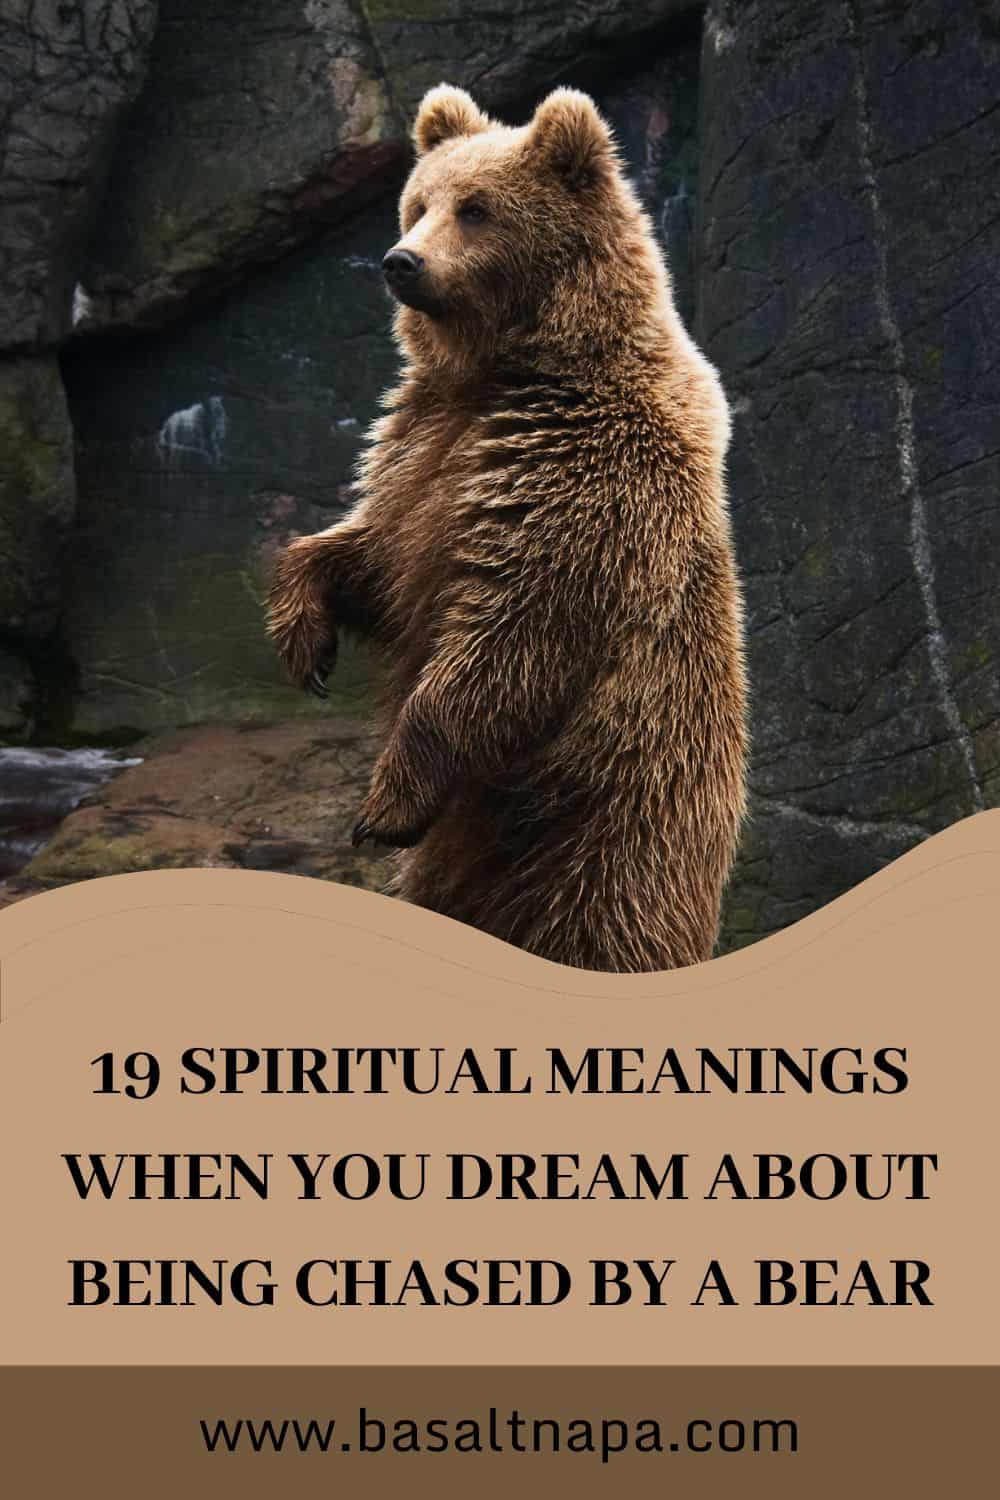 19 Spiritual Meanings When You Dream About Being Chased By a Bear